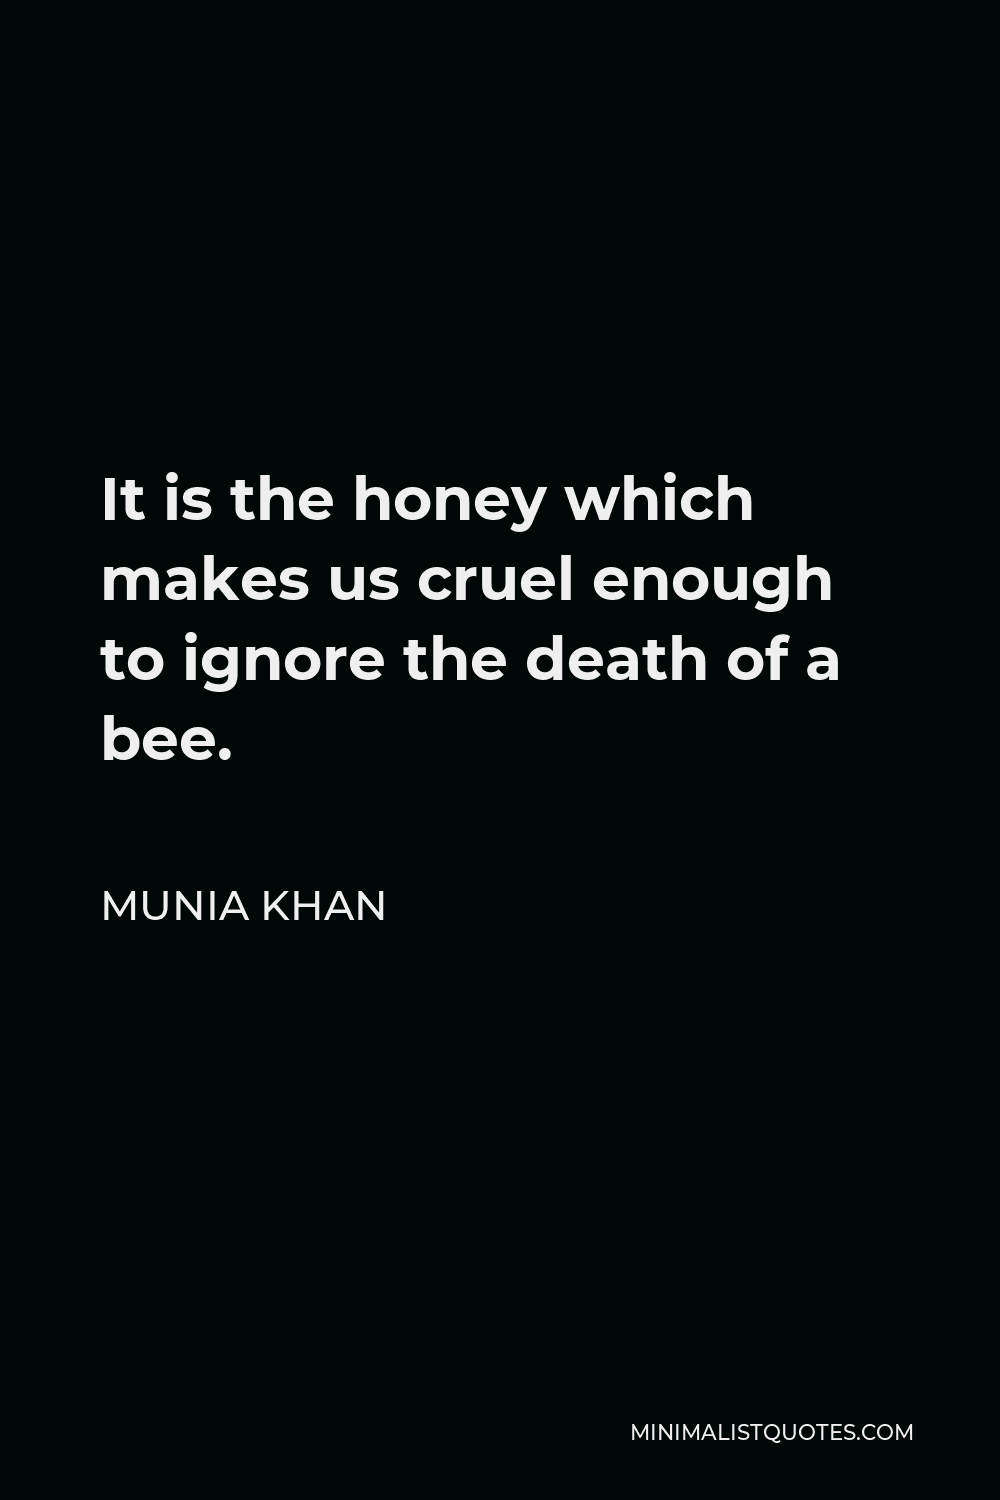 Munia Khan Quote - It is the honey which makes us cruel enough to ignore the death of a bee.